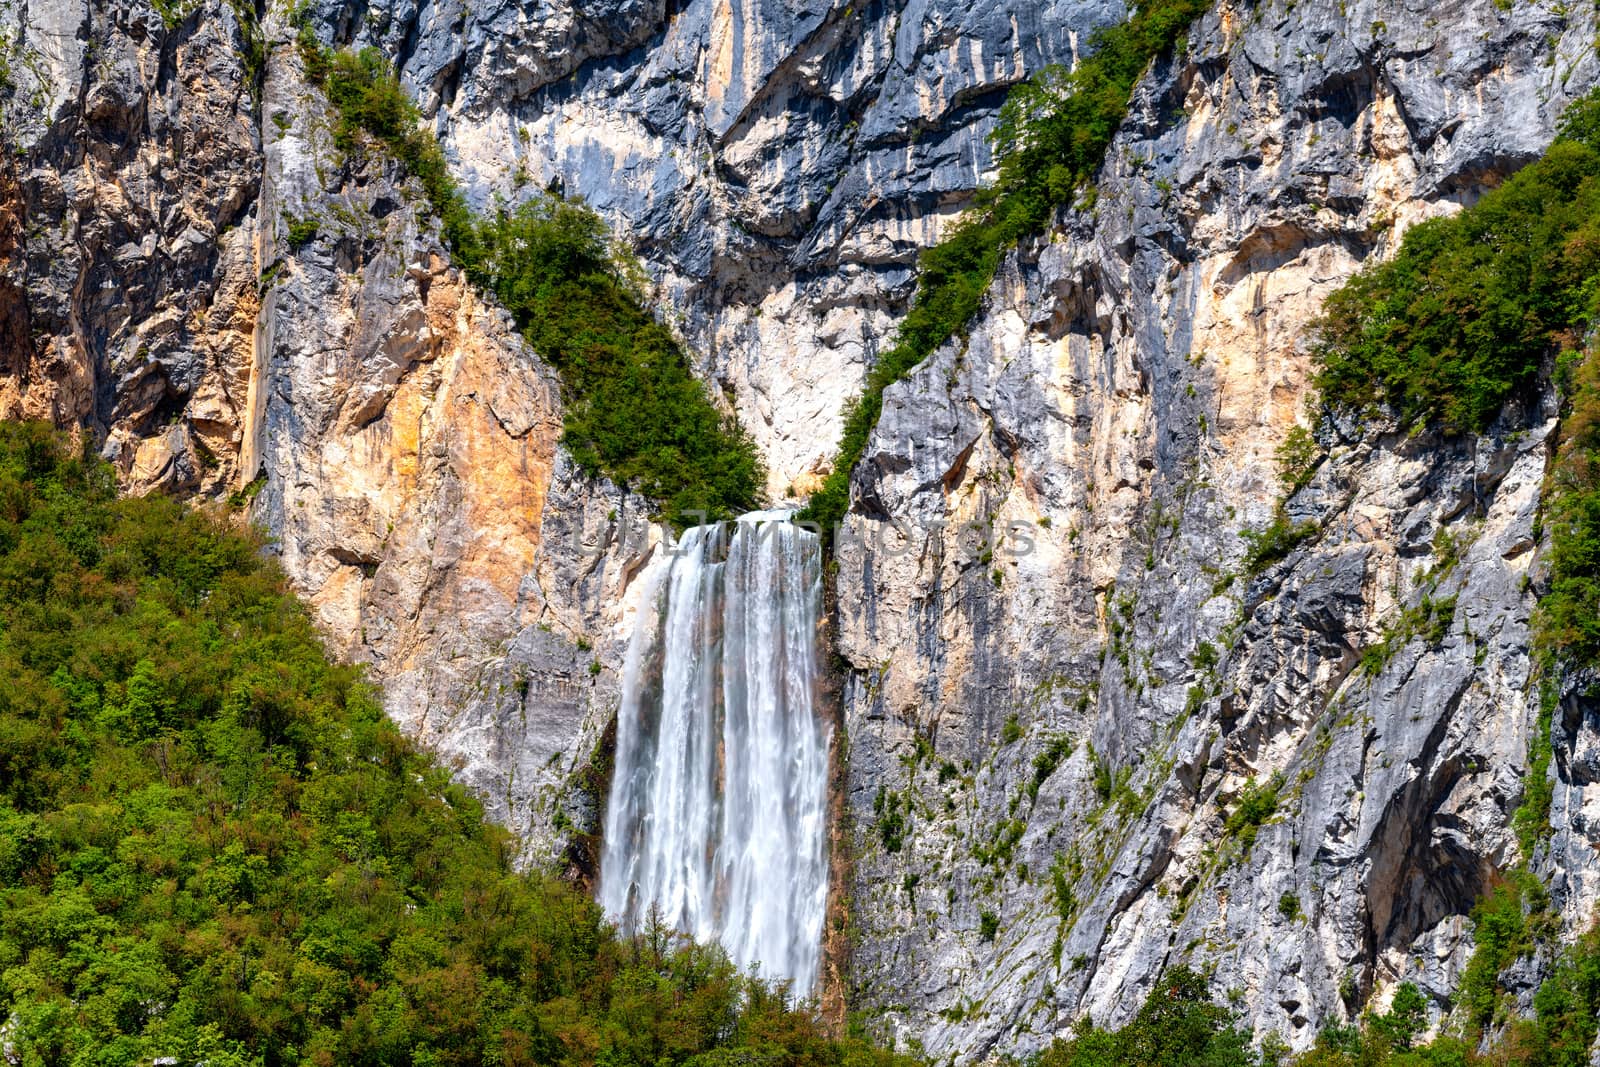 Boka waterfall in Julian Alps, Slovenia is one of the highest waterfalls in european Alps with 106m in height by asafaric